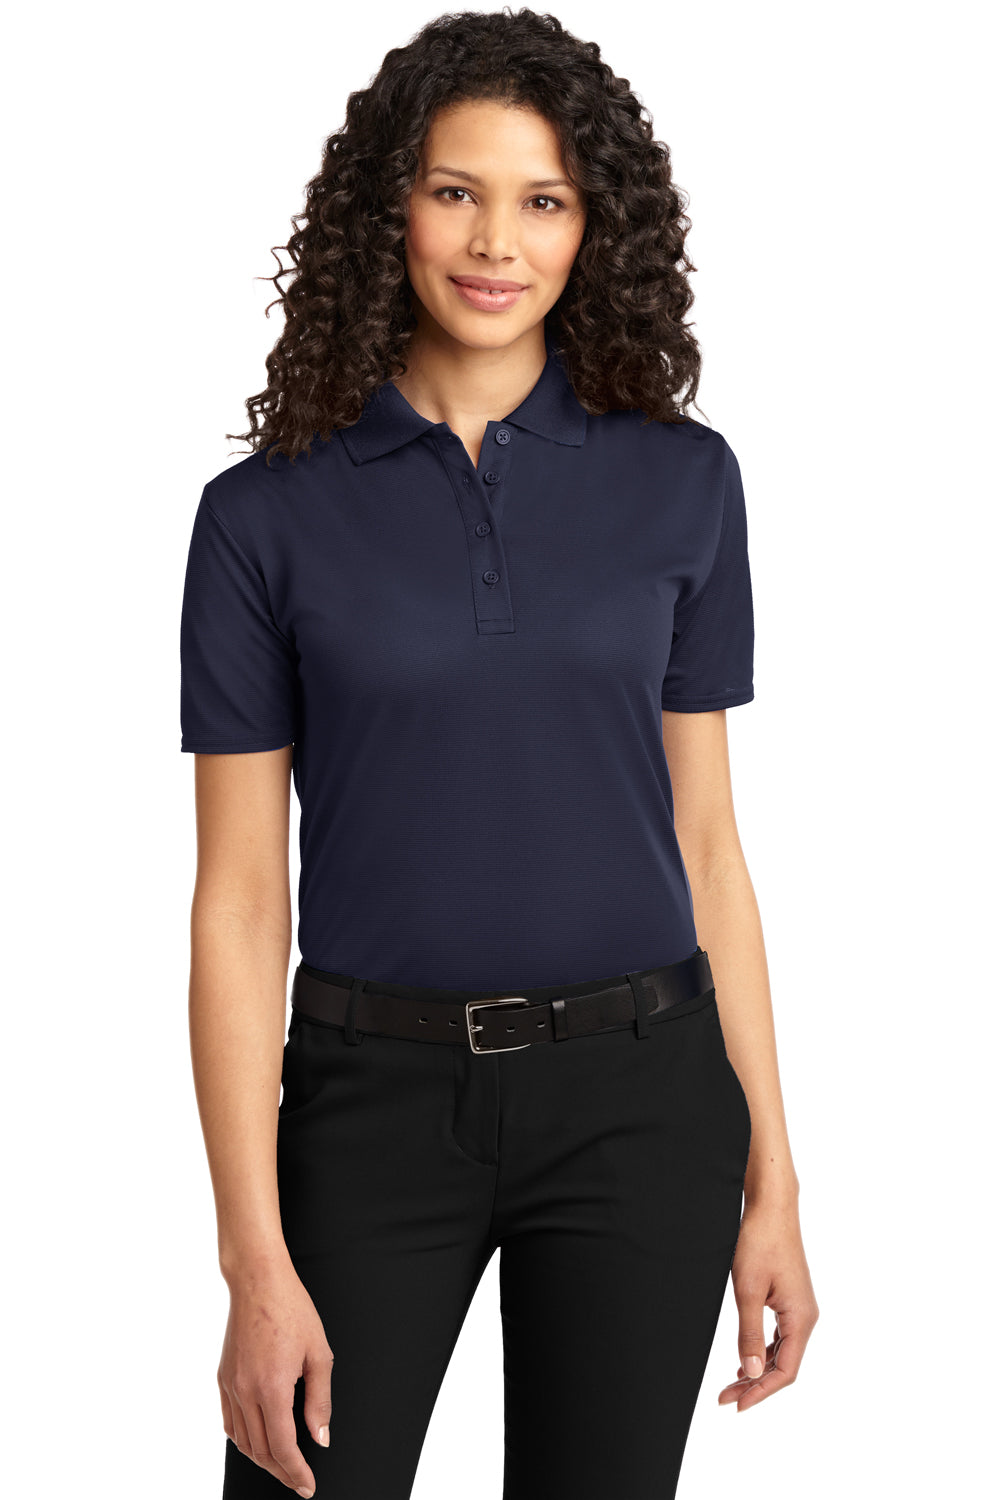 Port Authority L525 Womens Dry Zone Moisture Wicking Short Sleeve Polo Shirt Navy Blue Front